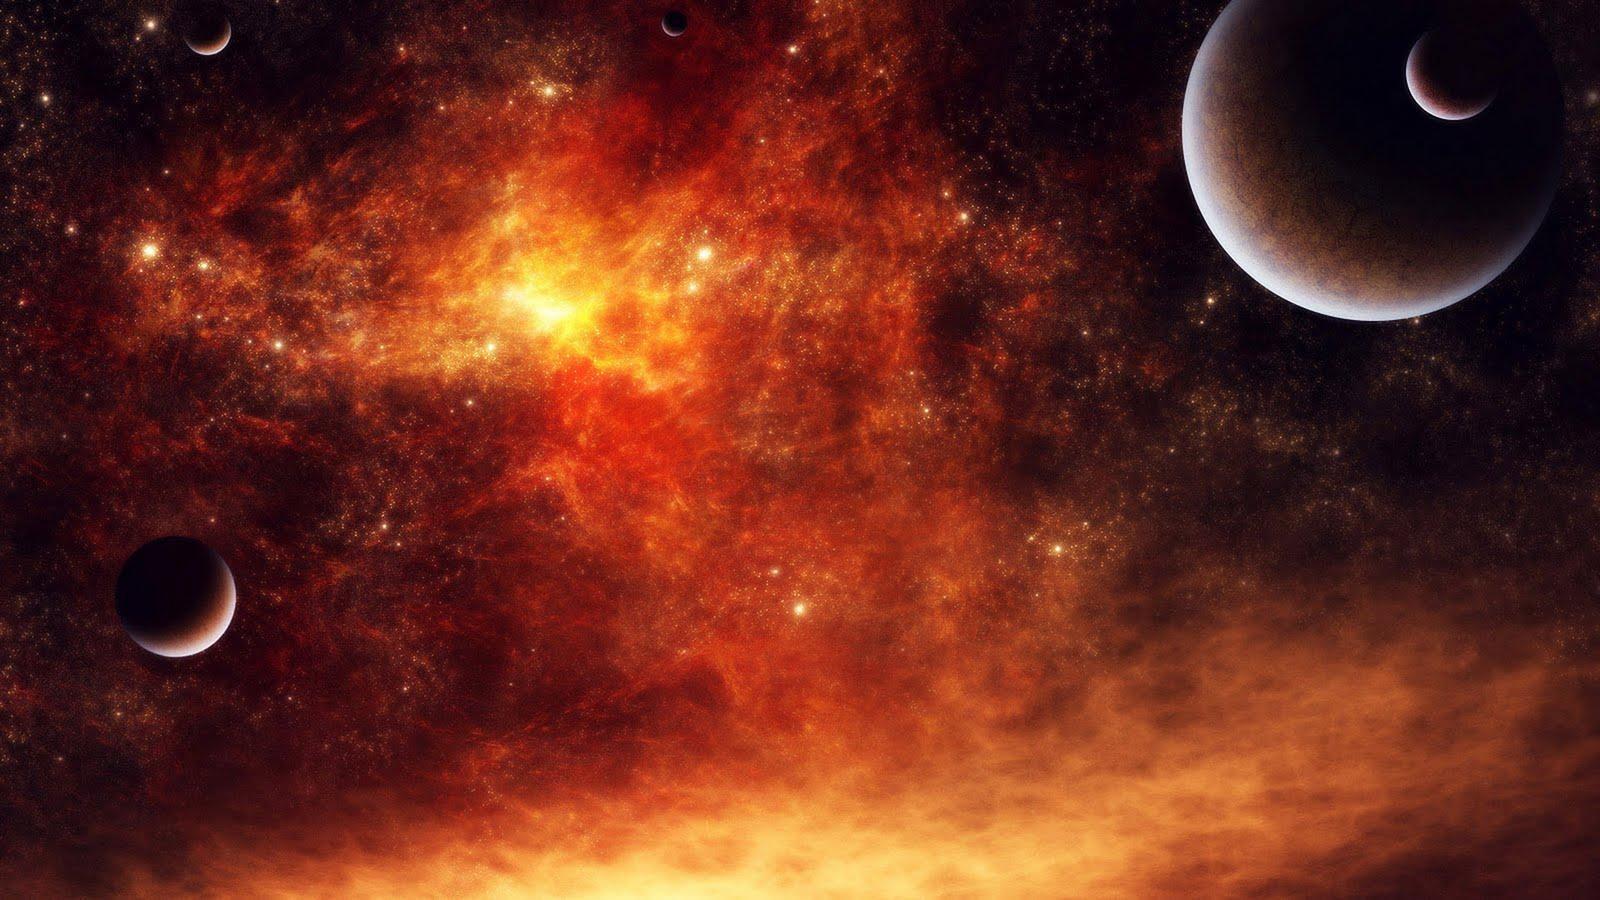 wallpaper: 1080p Wallpapers Of Space